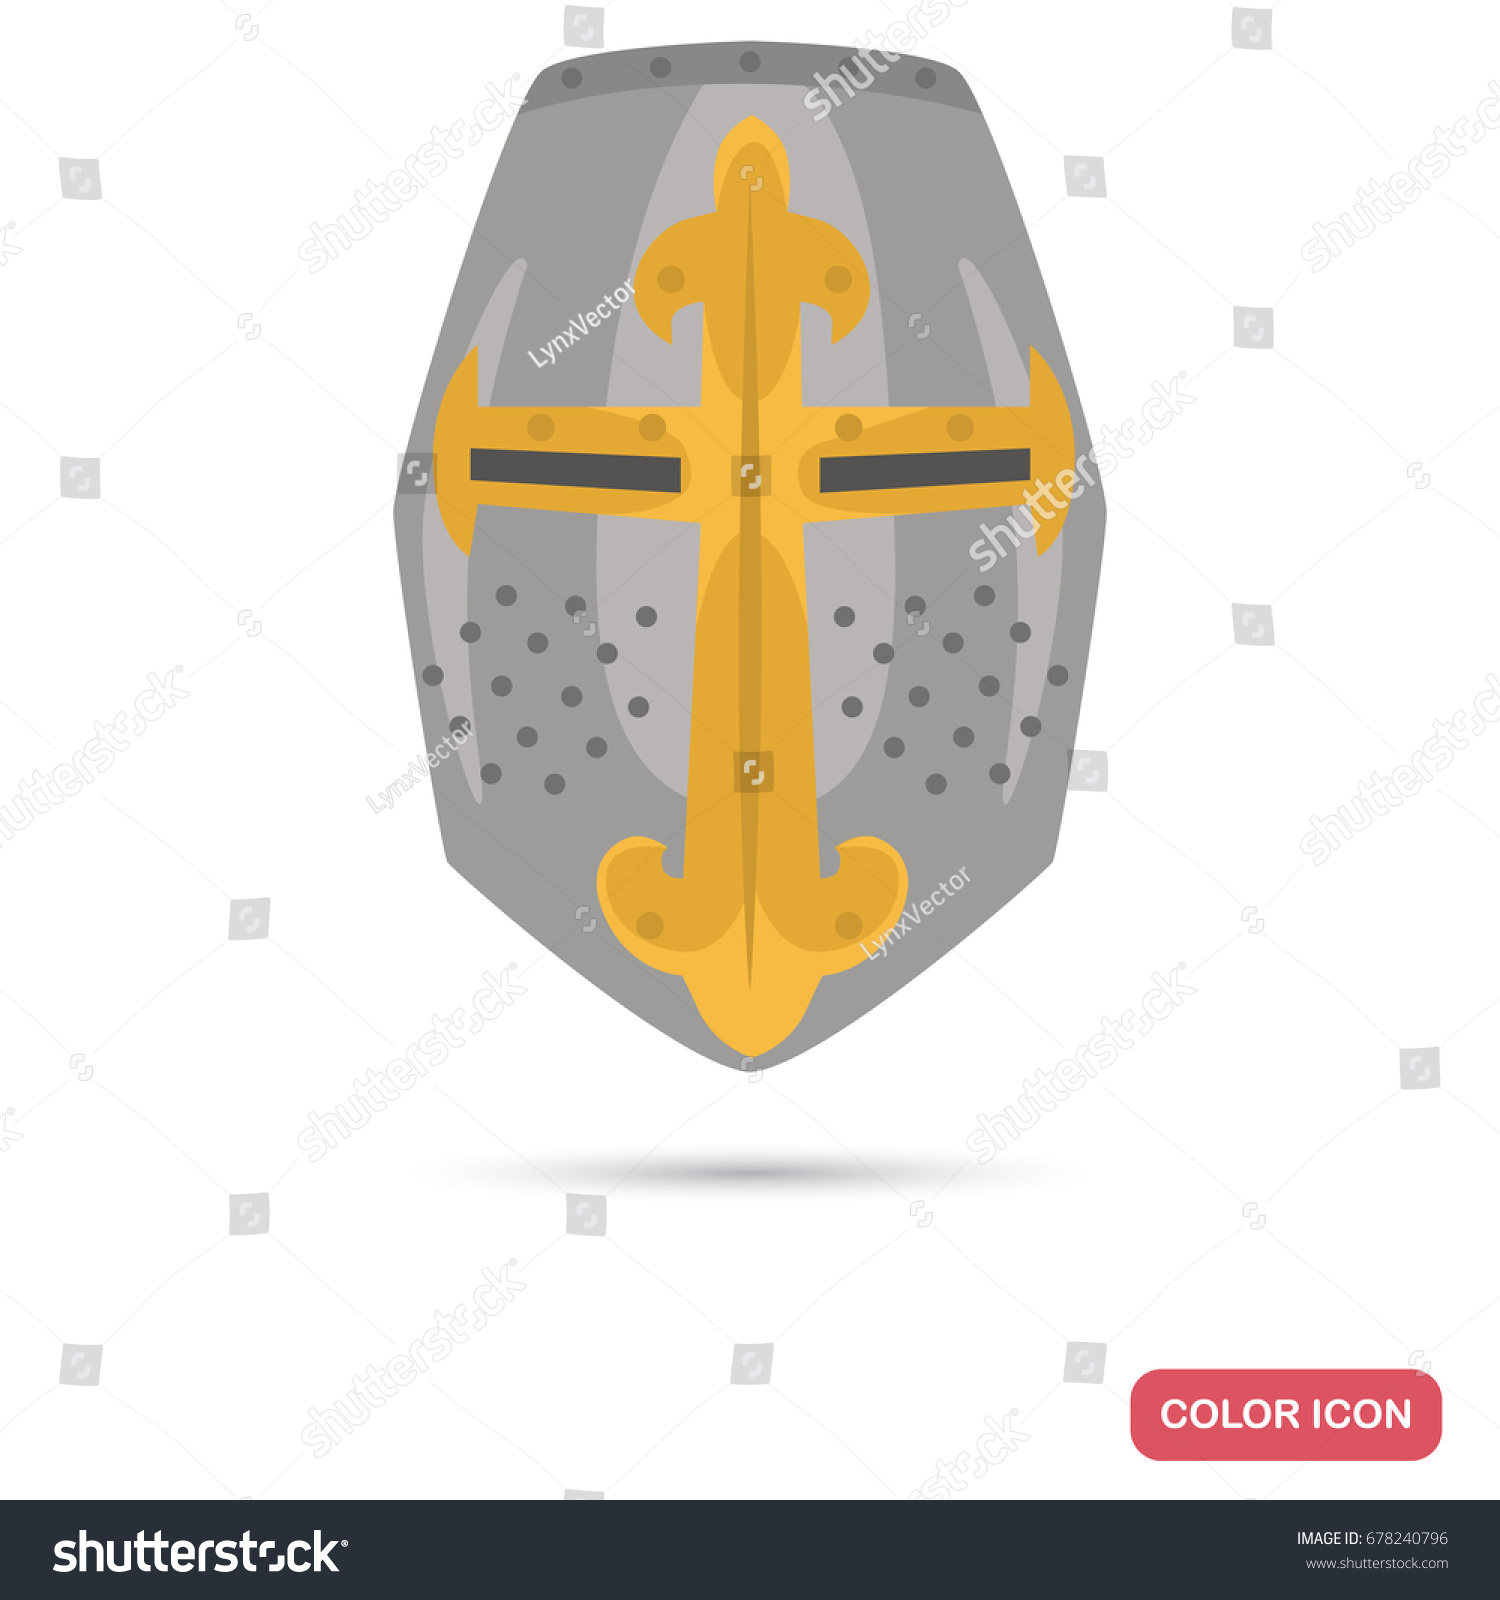 Crusader Helmet Color Flat Icon Web Stock Vector (Royalty Free) 678240796 S...